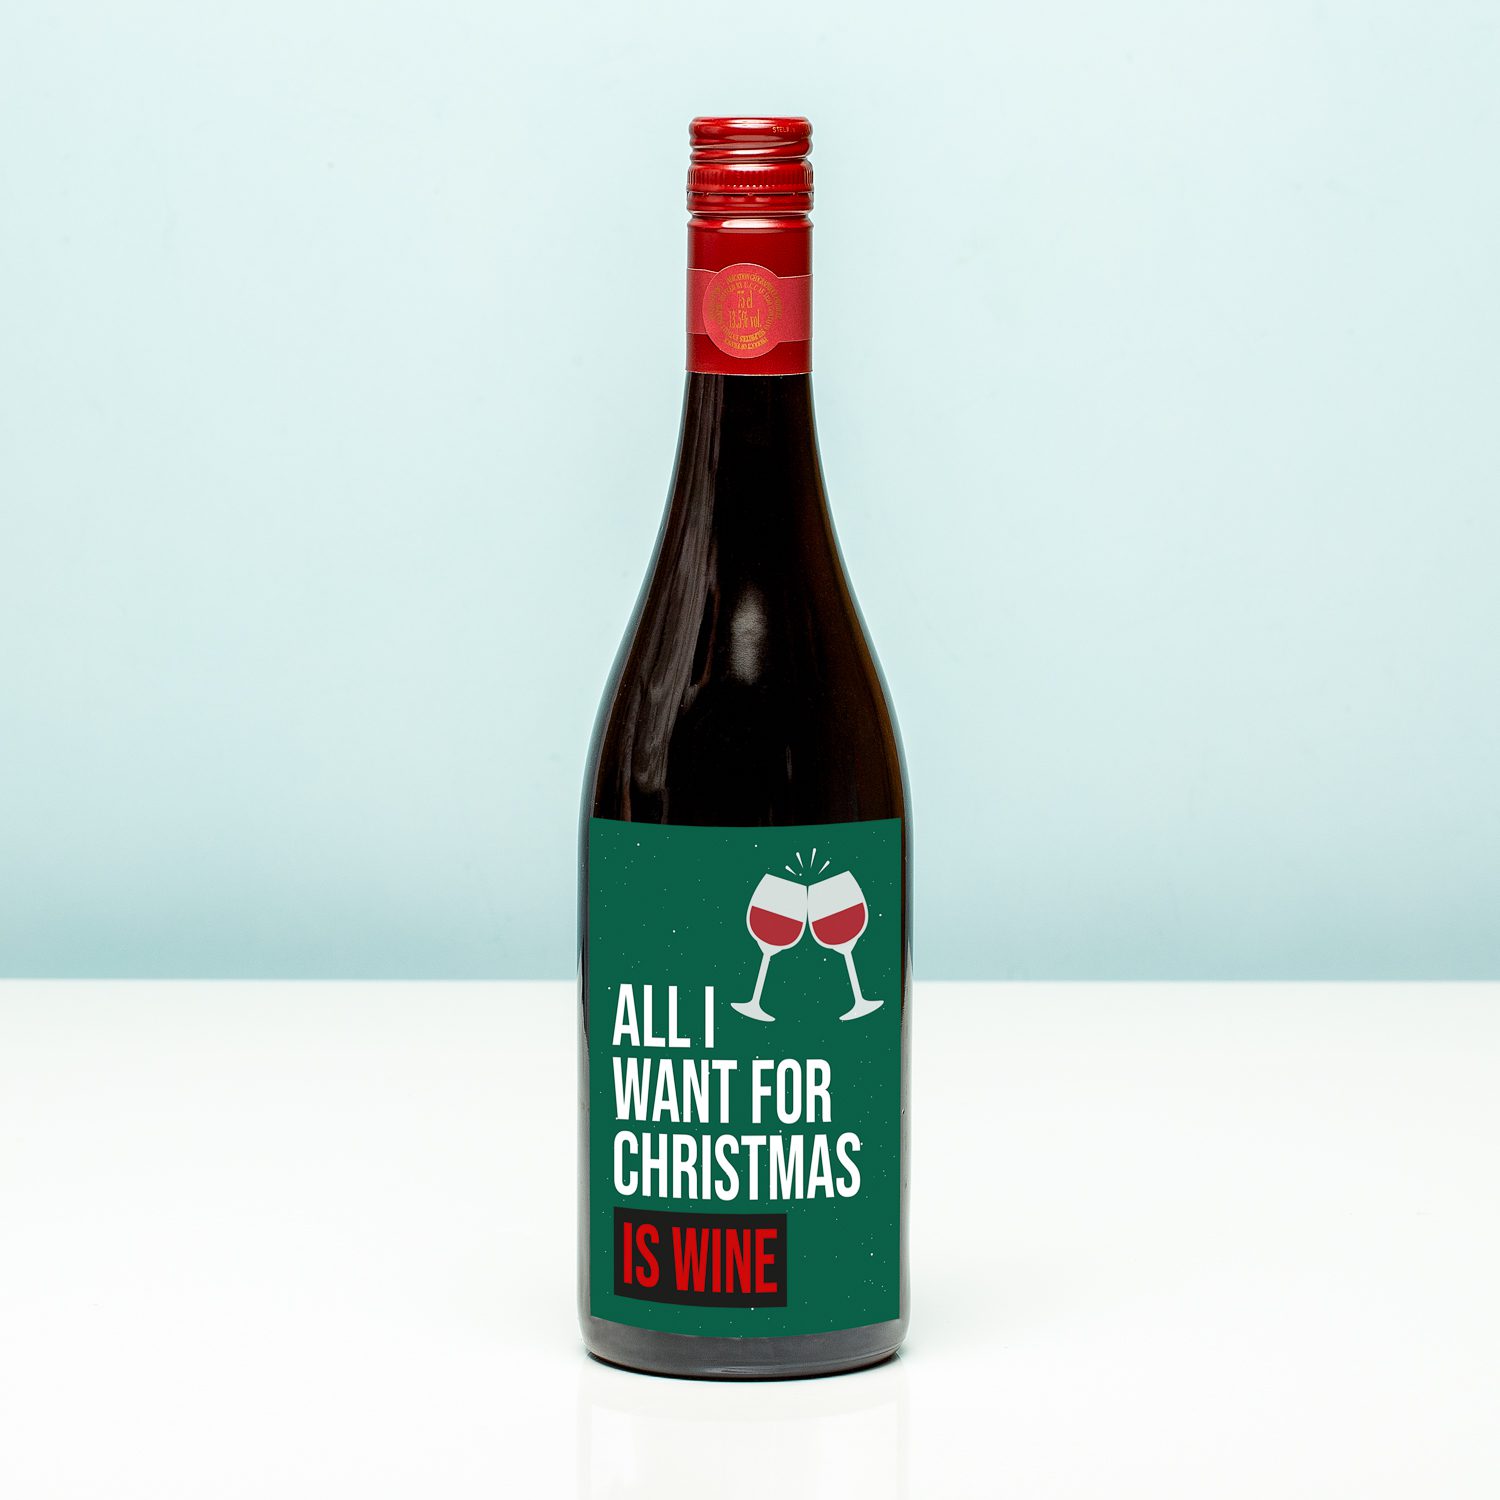 Kerst Wijnfles All I Want For Christmas Is Wine - Rood (Merlot)